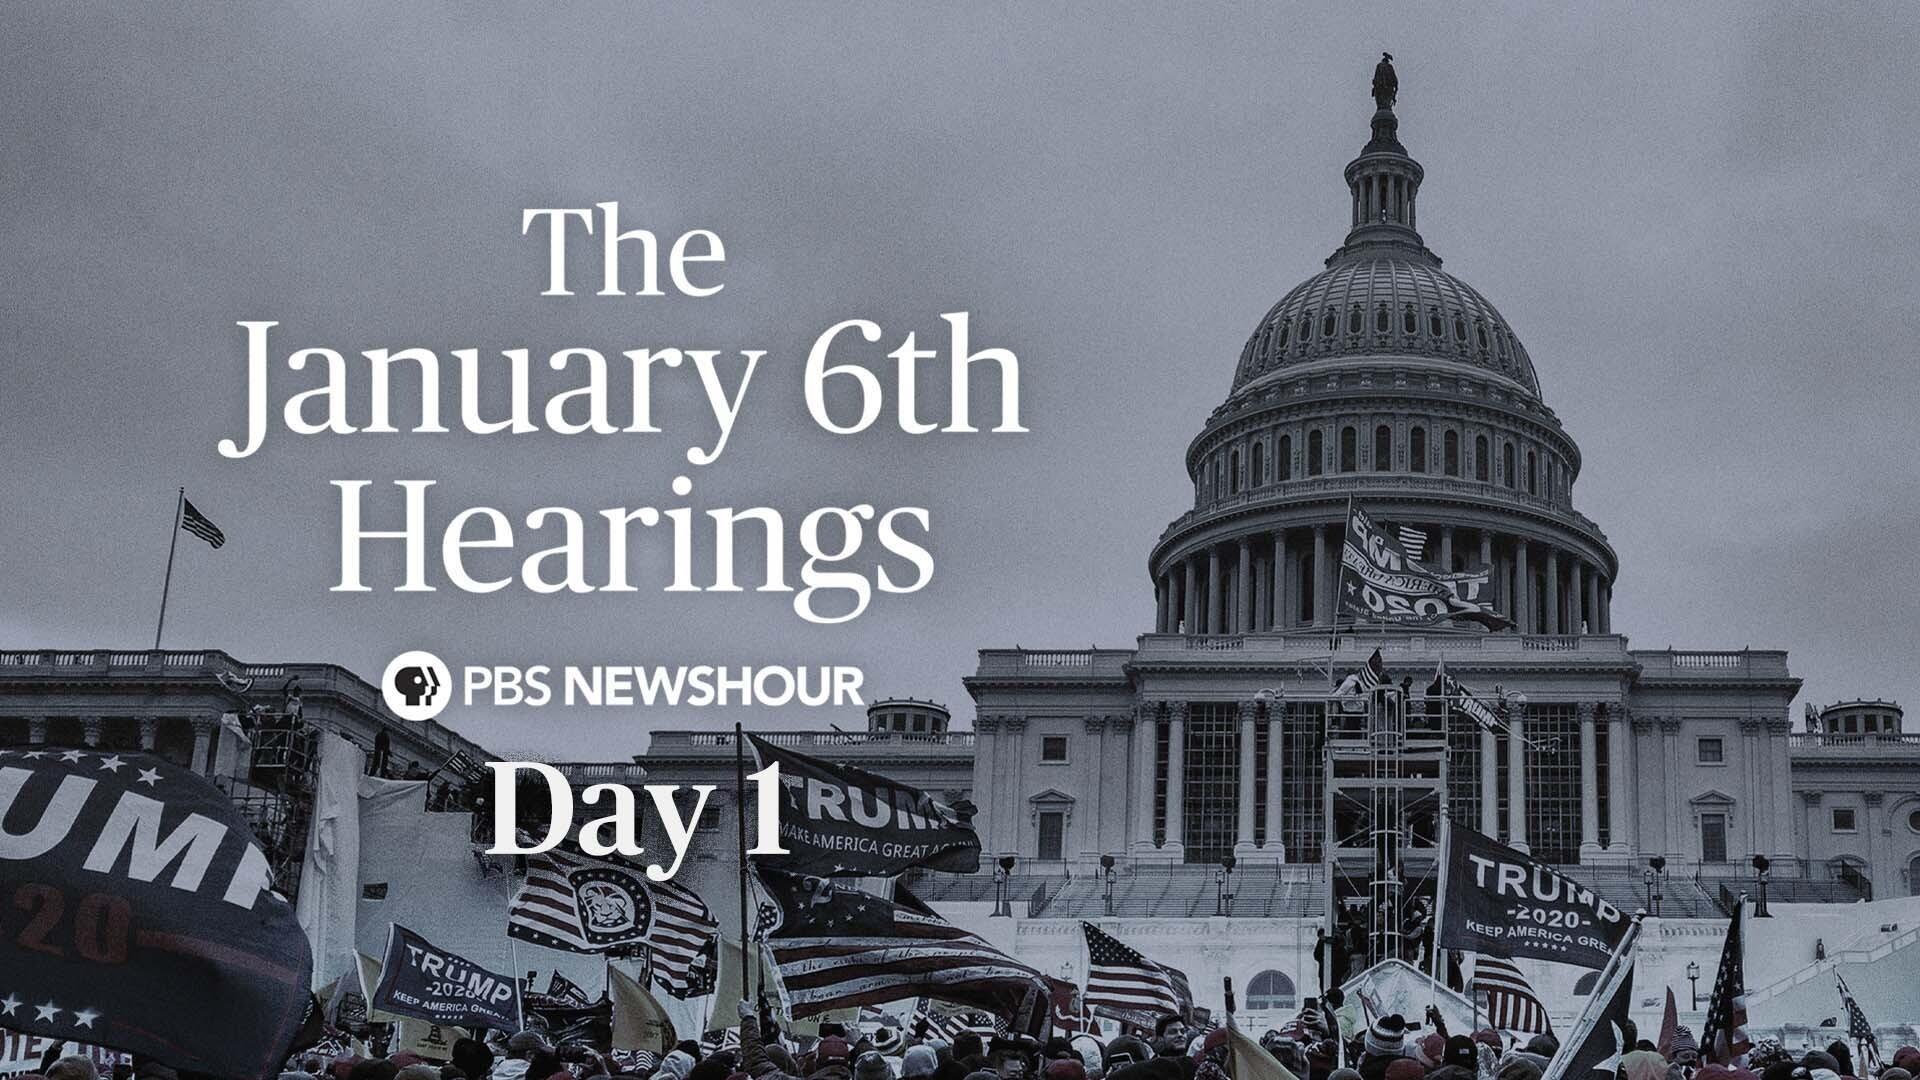 The January 6th Hearings - Day 1